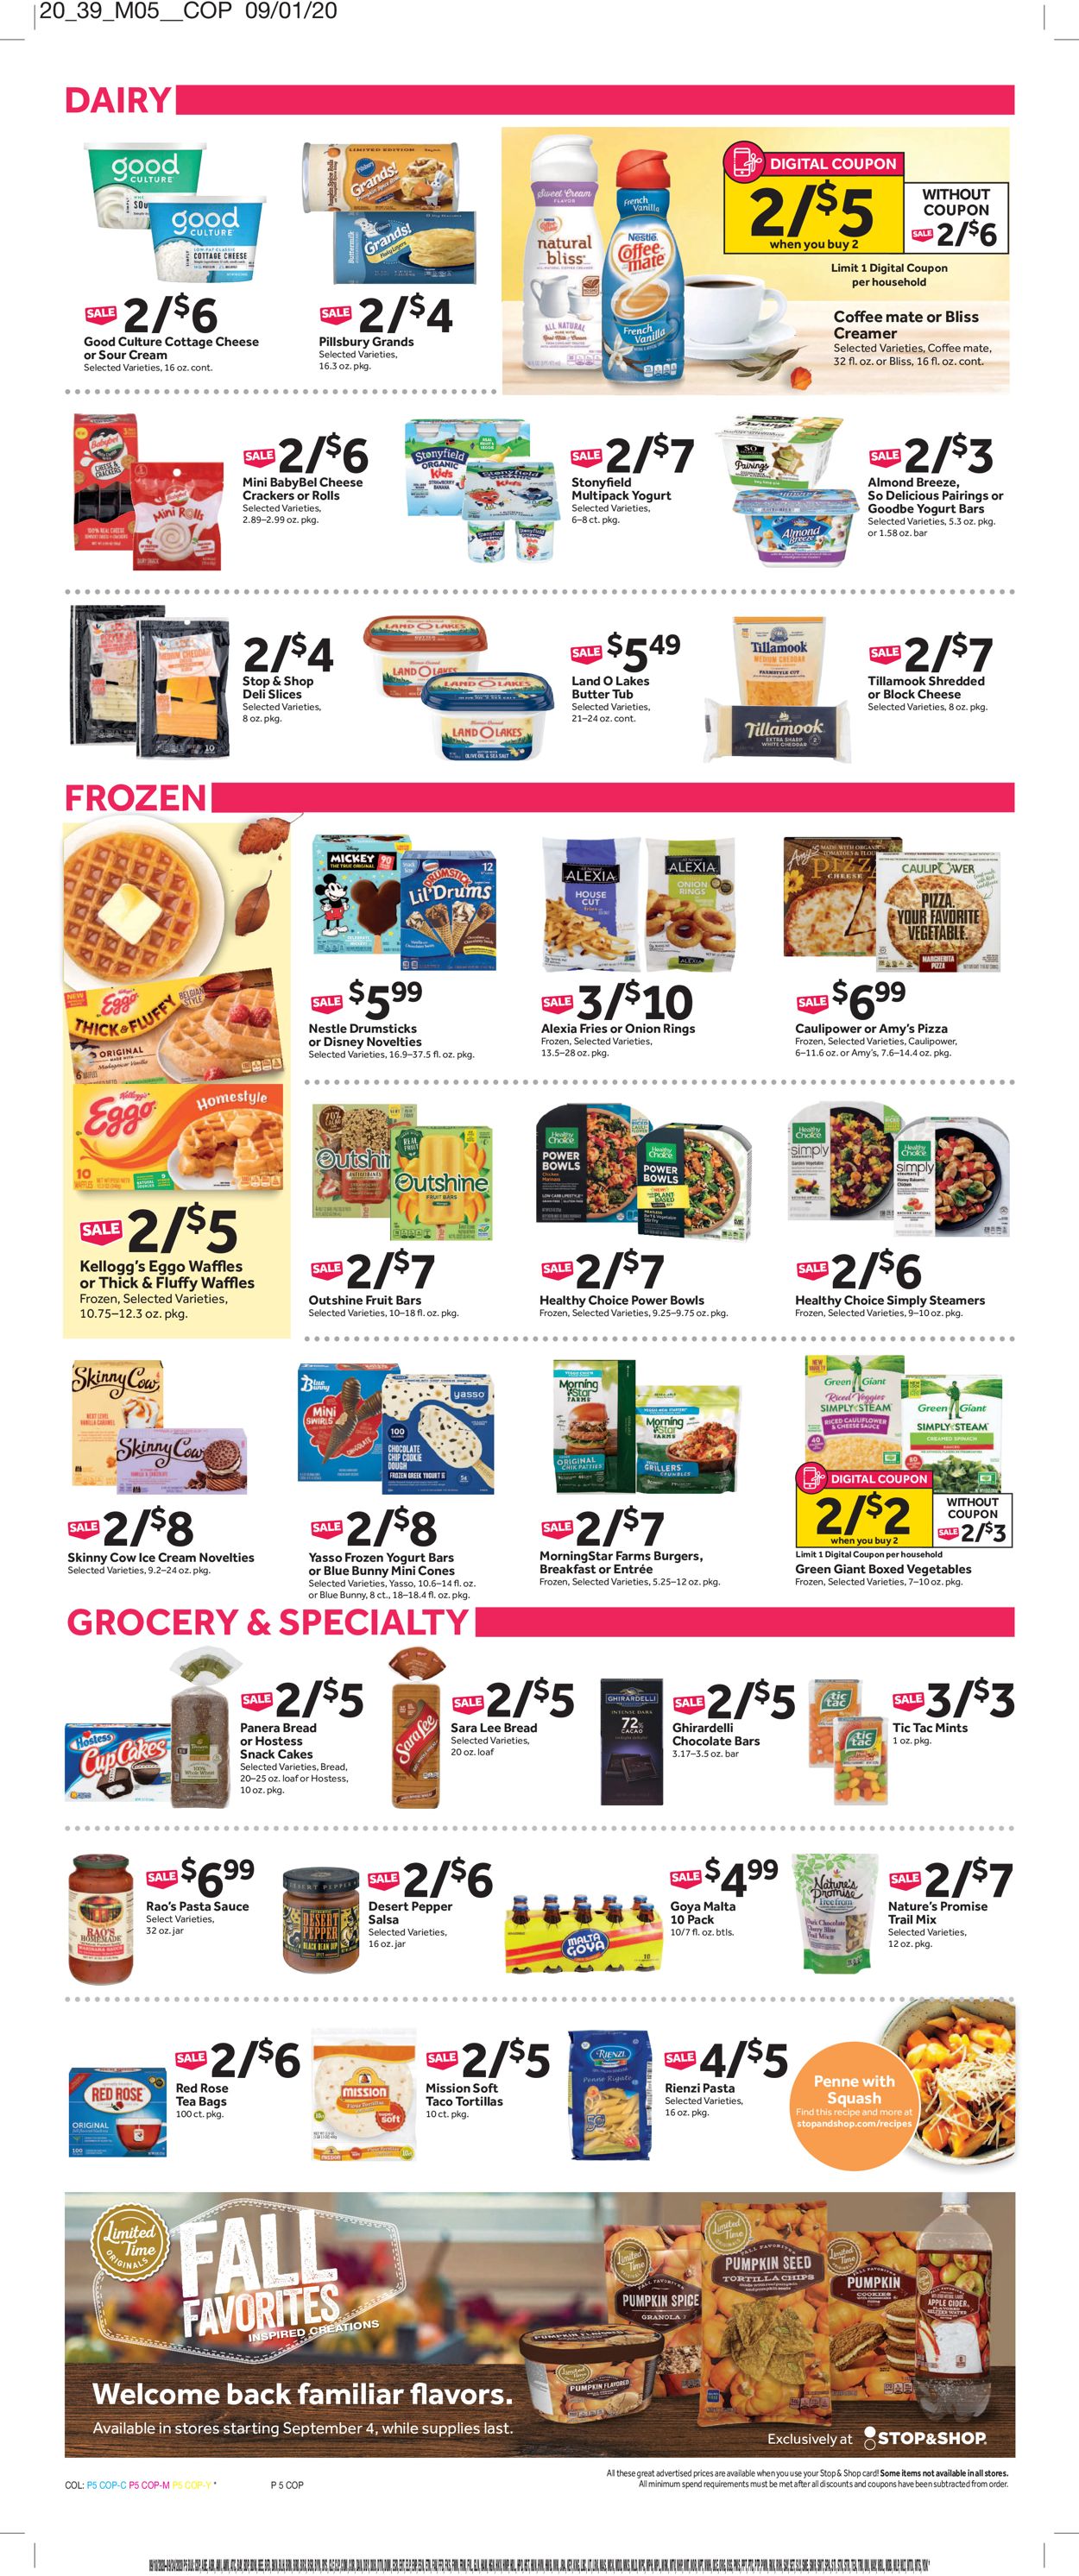 Stop and Shop Ad from 09/18/2020